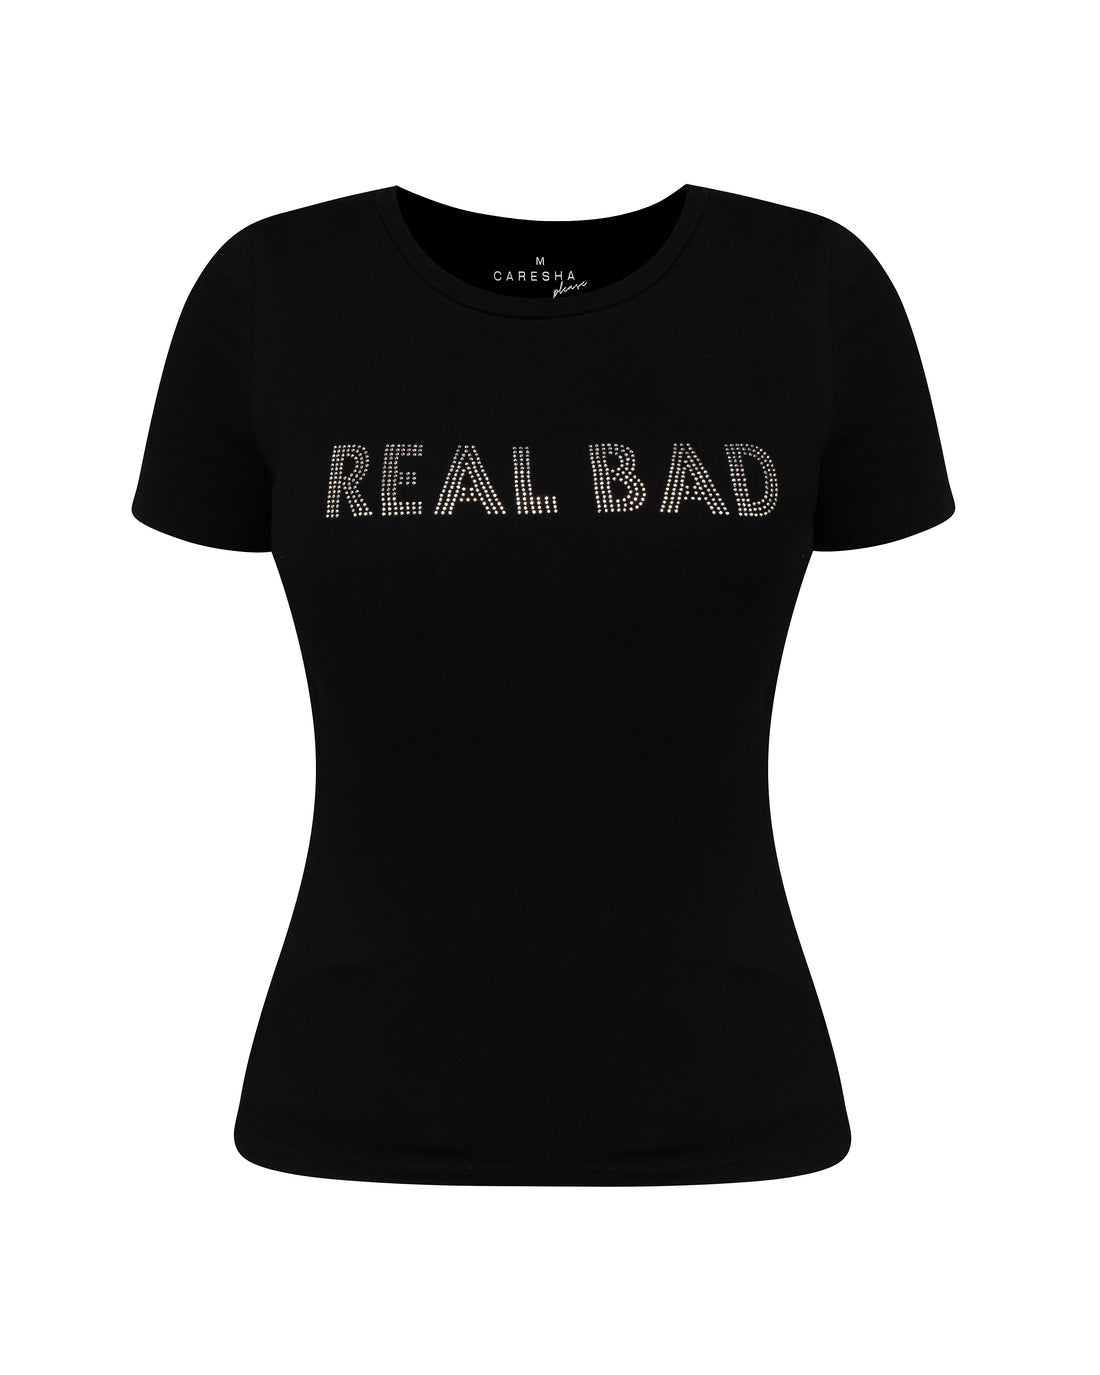 Real Bad Fitted Tee